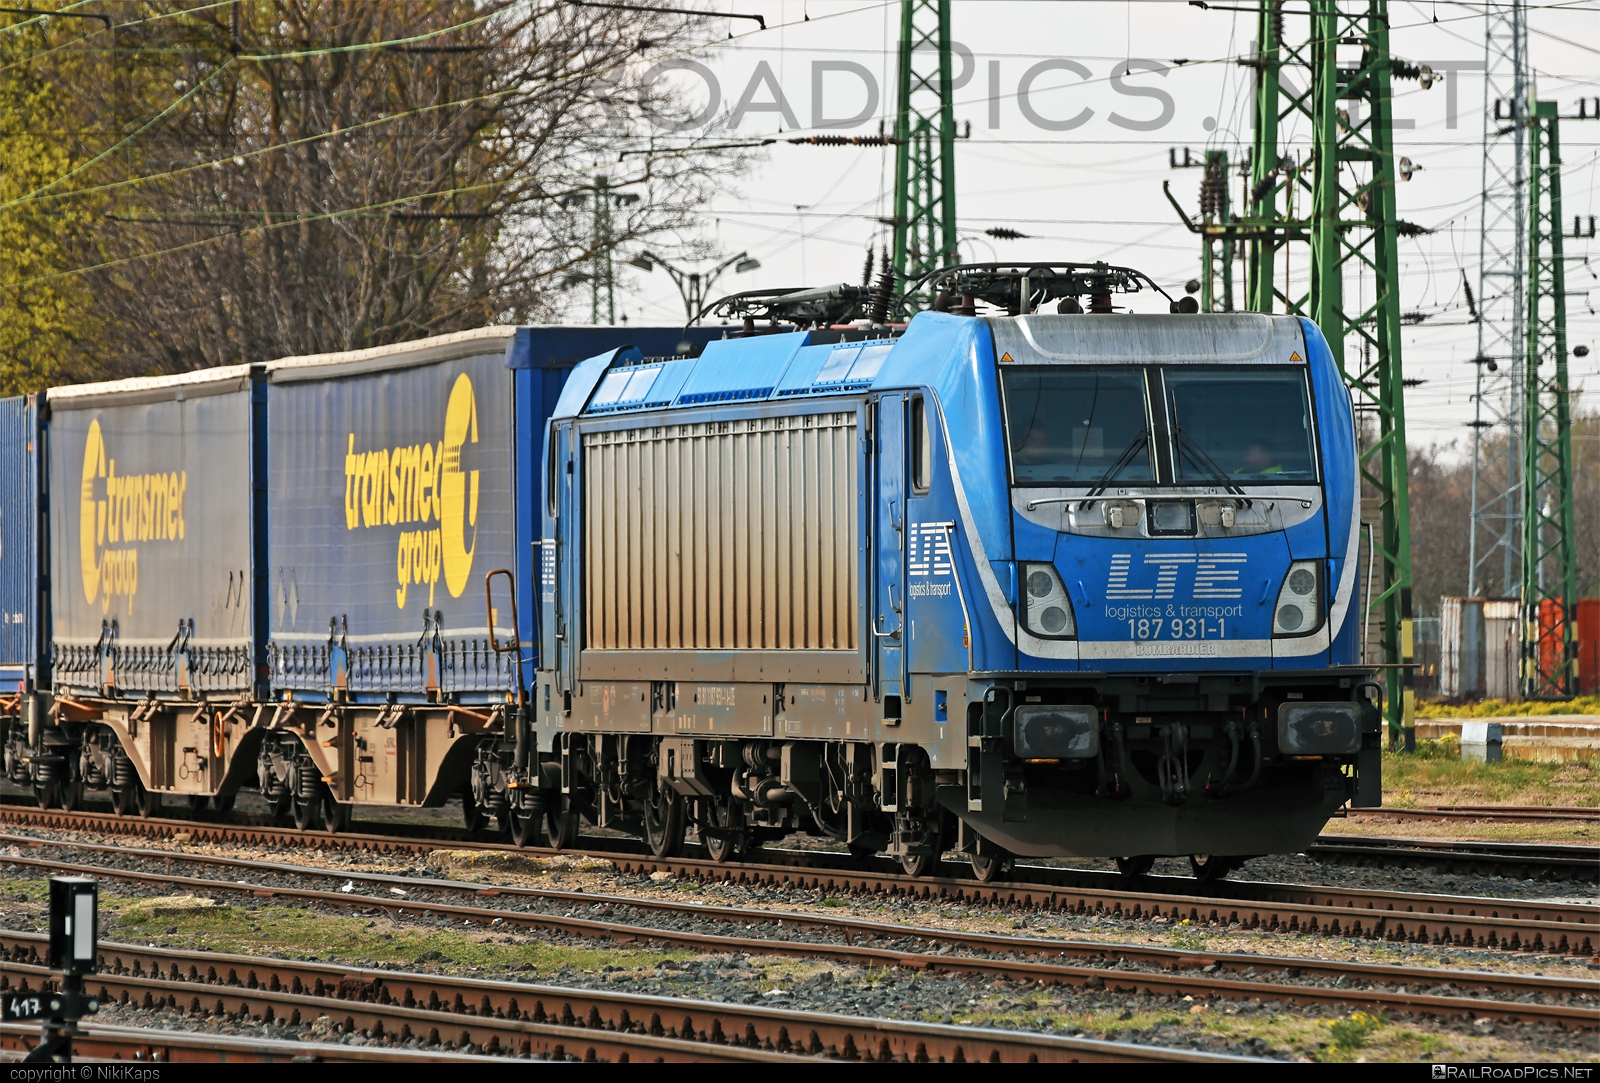 Bombardier TRAXX F160 AC3 - 187 931-1 operated by LTE Logistik und Transport GmbH #bombardier #bombardiertraxx #flatwagon #lte #ltelogistikundtransport #ltelogistikundtransportgmbh #traxx #traxxf160 #traxxf160ac #traxxf160ac3